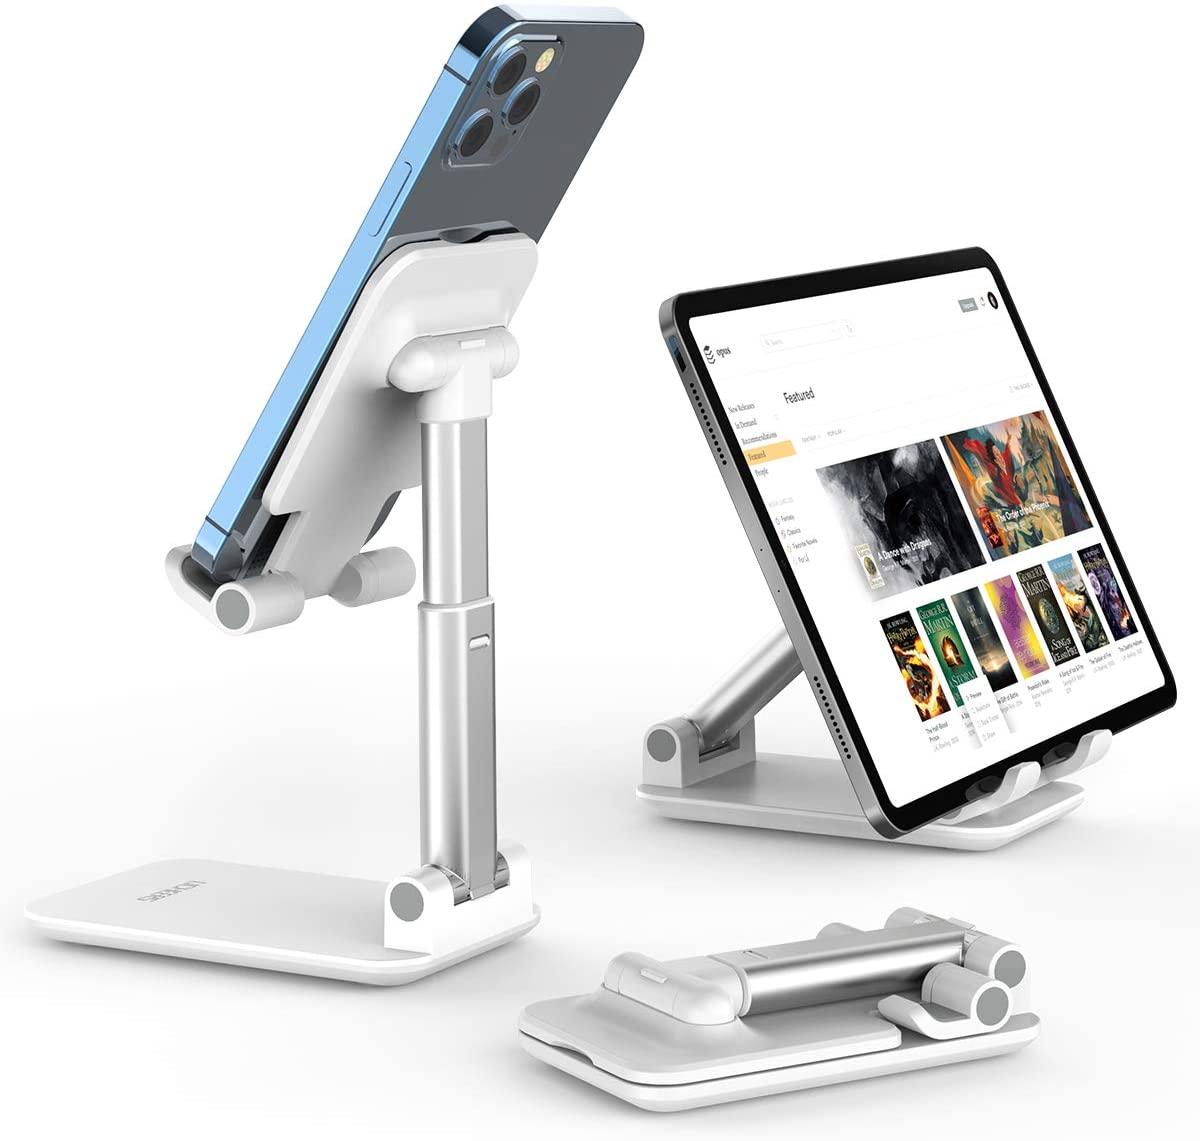 Licheers Foldable Phone Tablet Stand for $6.59